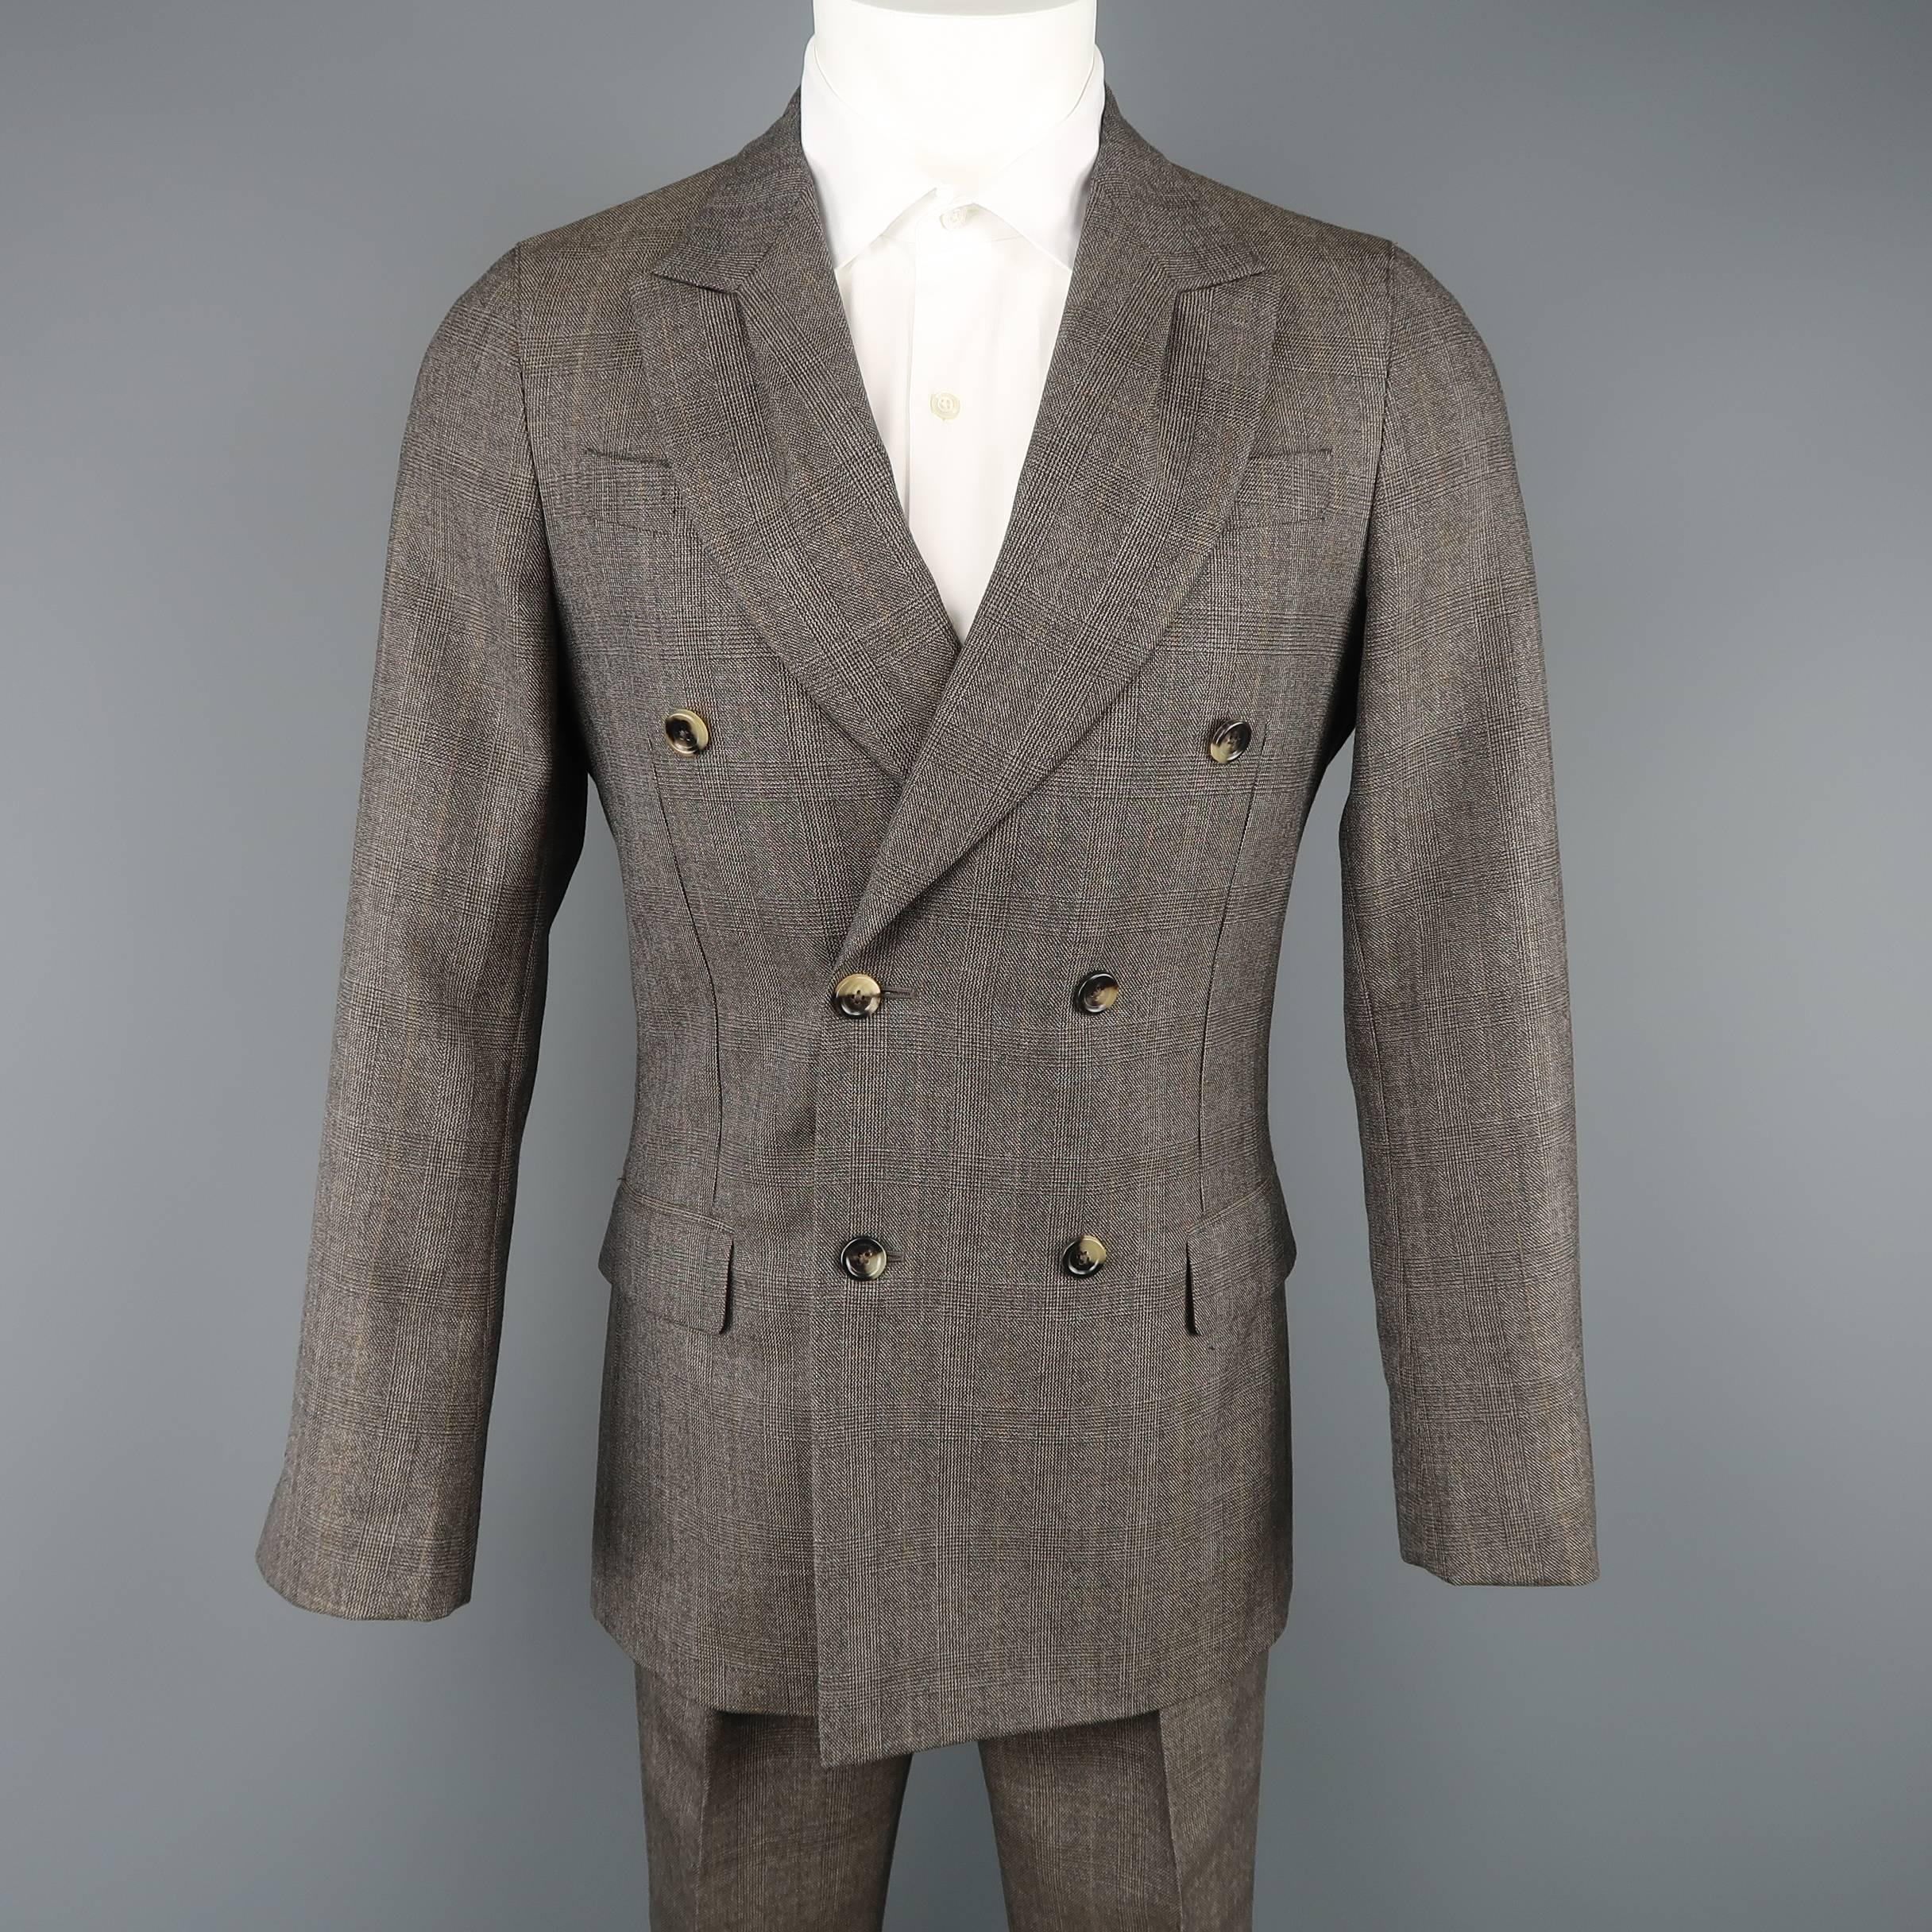 Two piece YVES SAINT LAURENT suit by TOM FORD comes in taupe Glenplaid wool and includes a double breasted sport coat with pleated peak lapel and tab cuffs,with matching single pleat trousers. Made in Italy.
 
Excellent Pre-Owned Condition.
Marked: